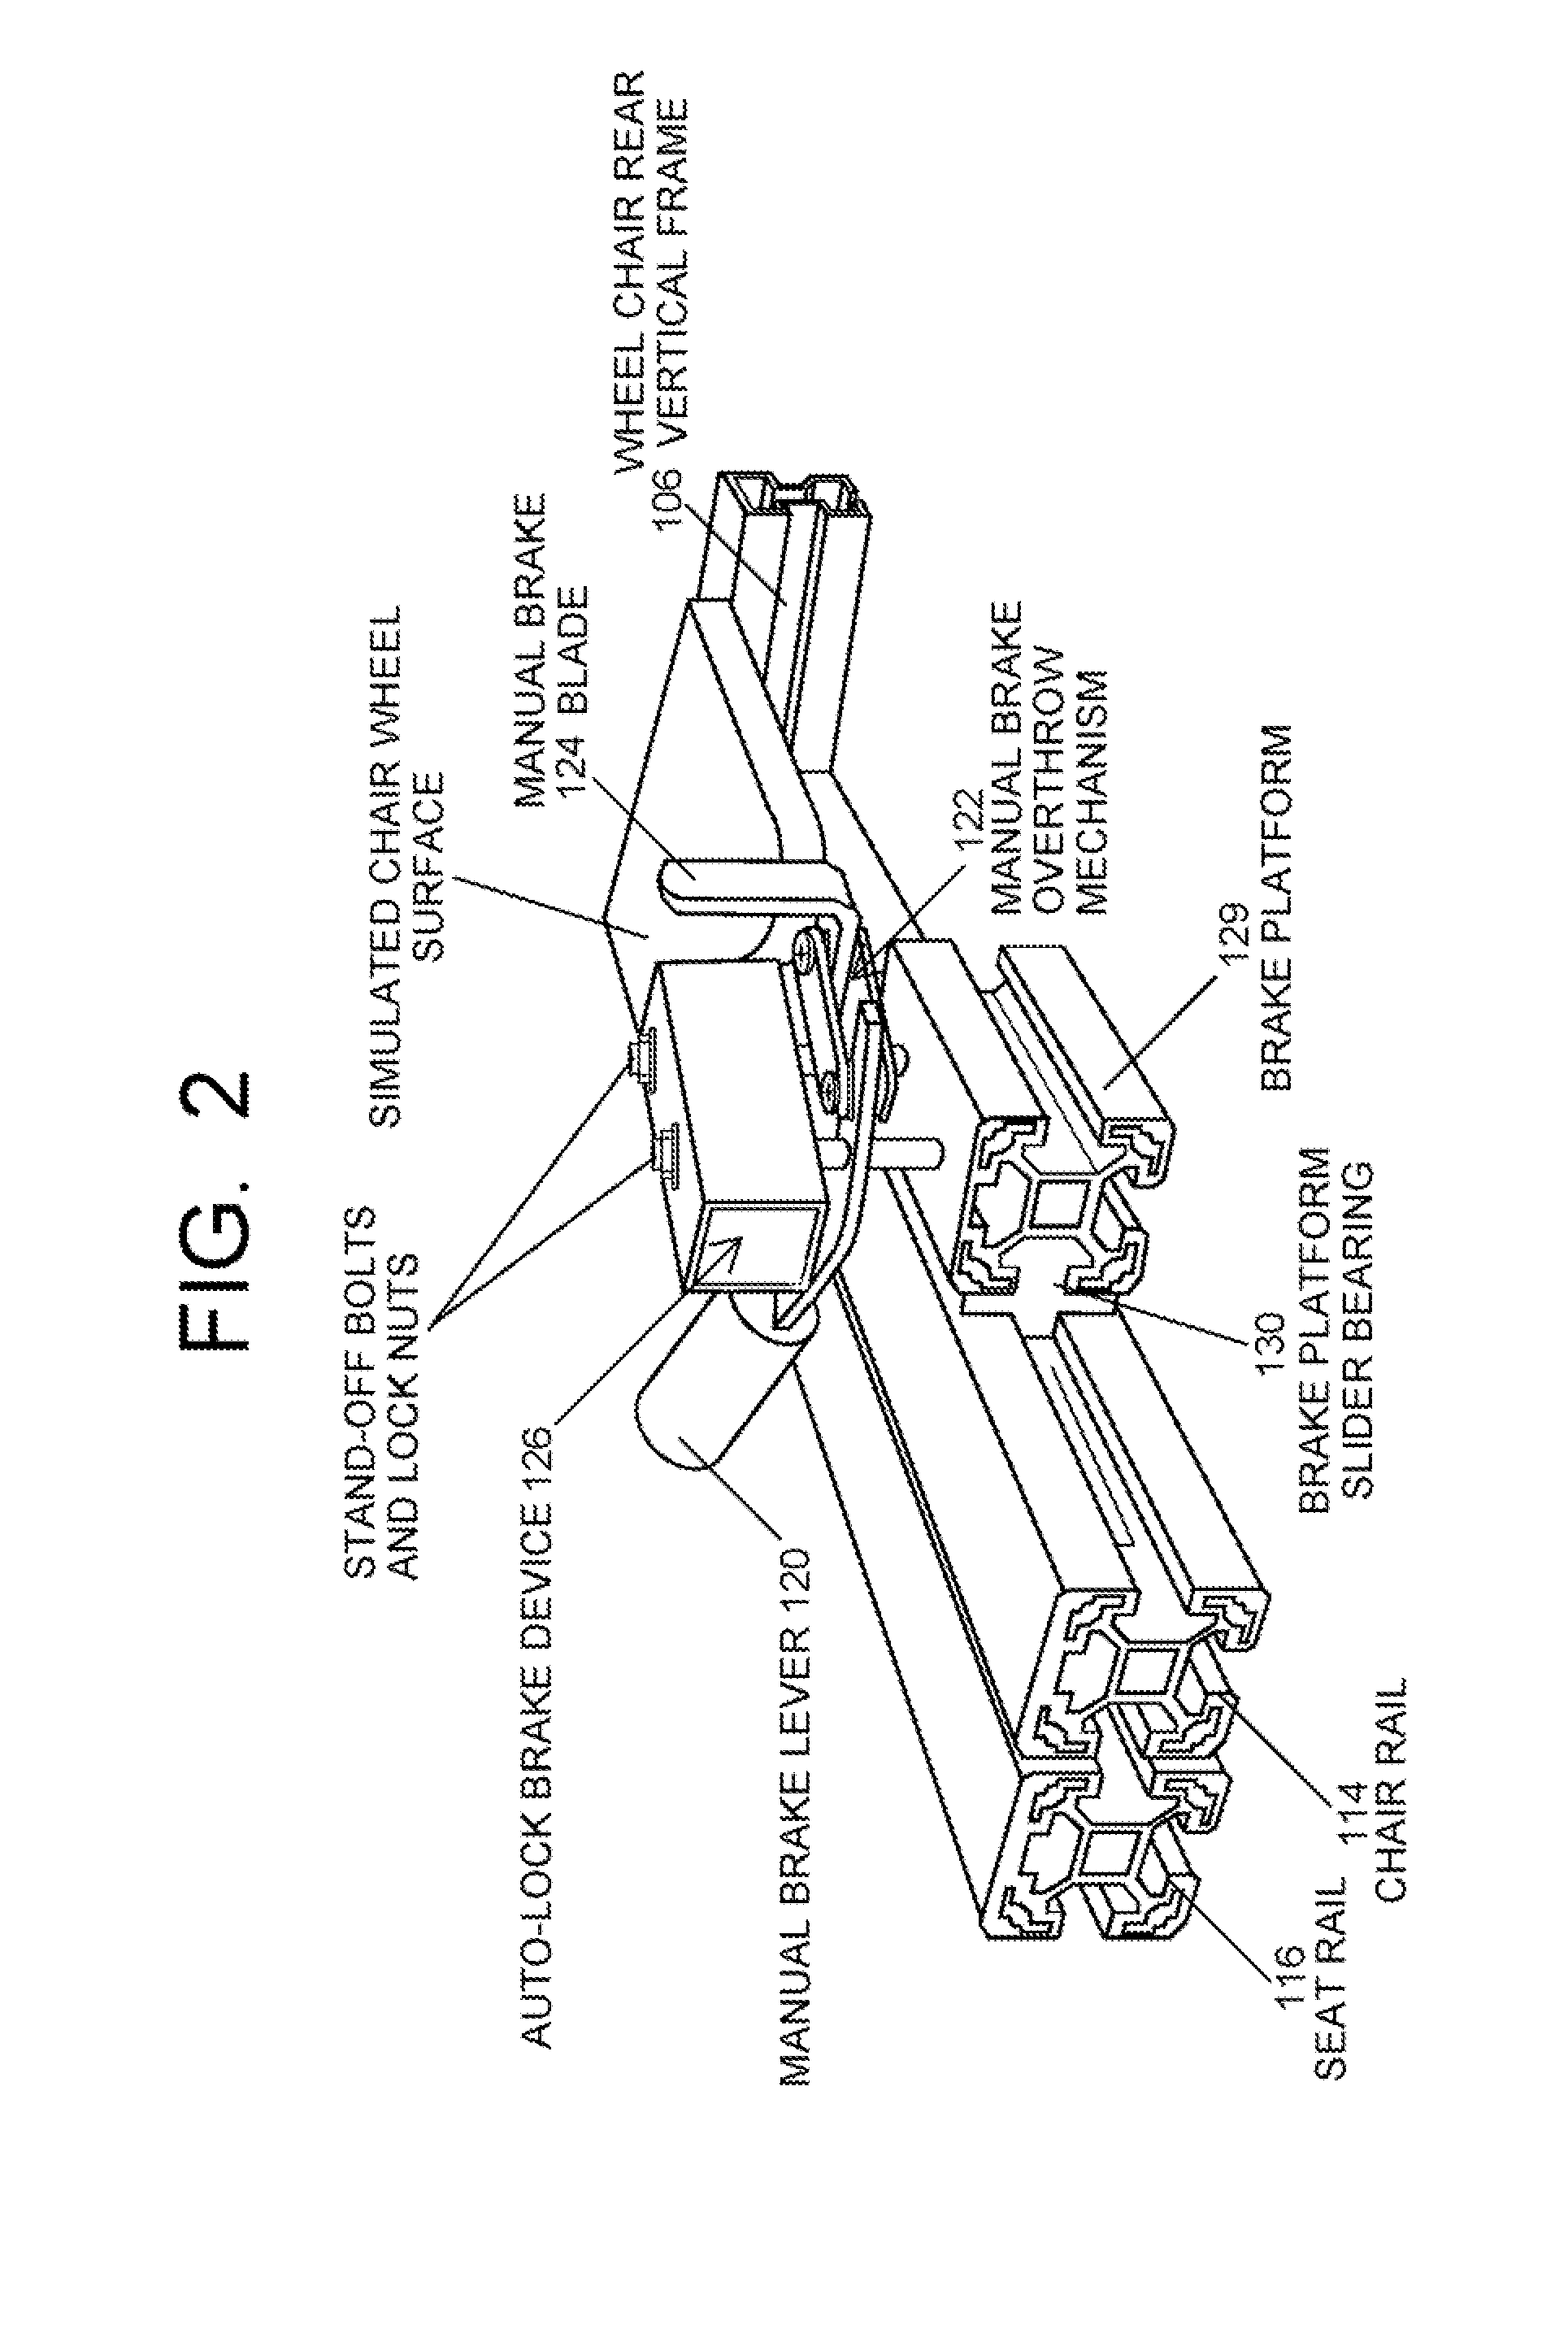 Structure, Components and Method for Constructing and Operating an Automatically self locking manually propelled vehicle such as a wheel chair